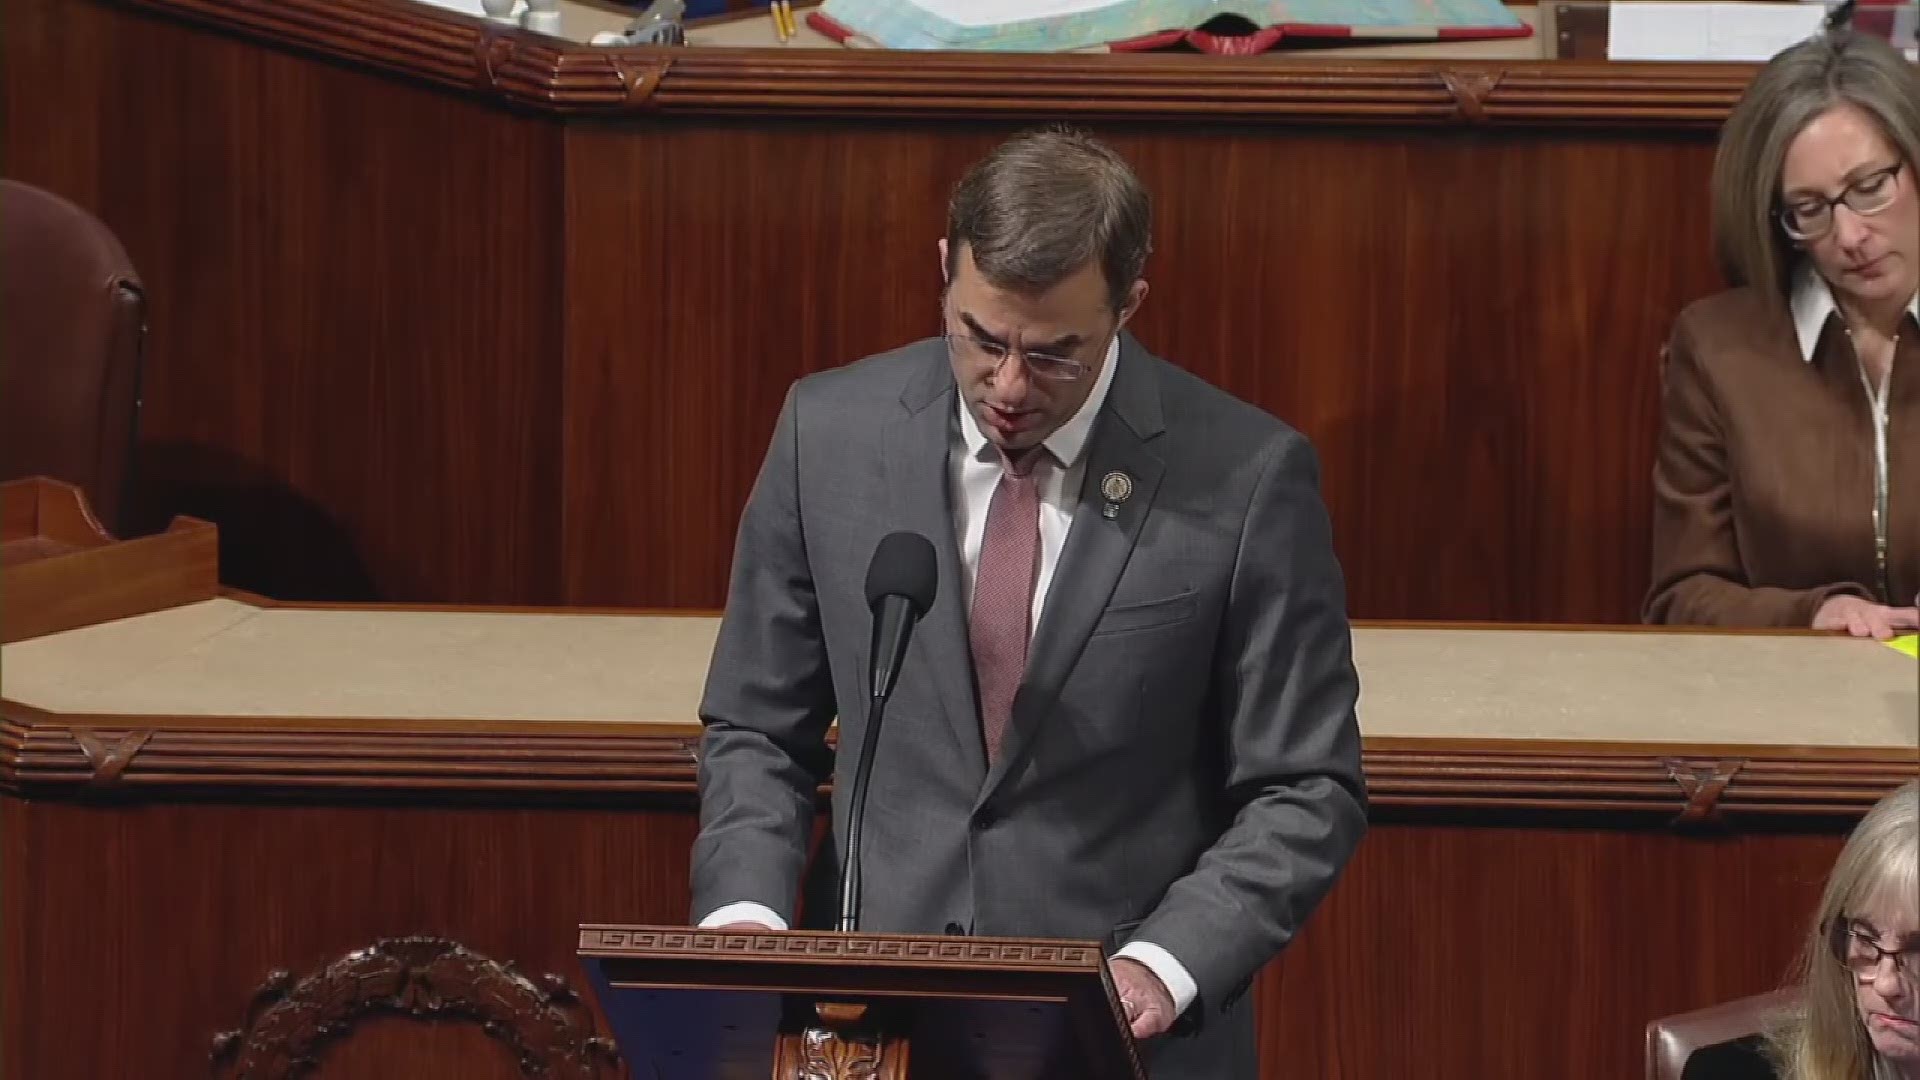 Justin Amash and Bill Huizenga spoke Wednesday about their vote in the impeachment process.